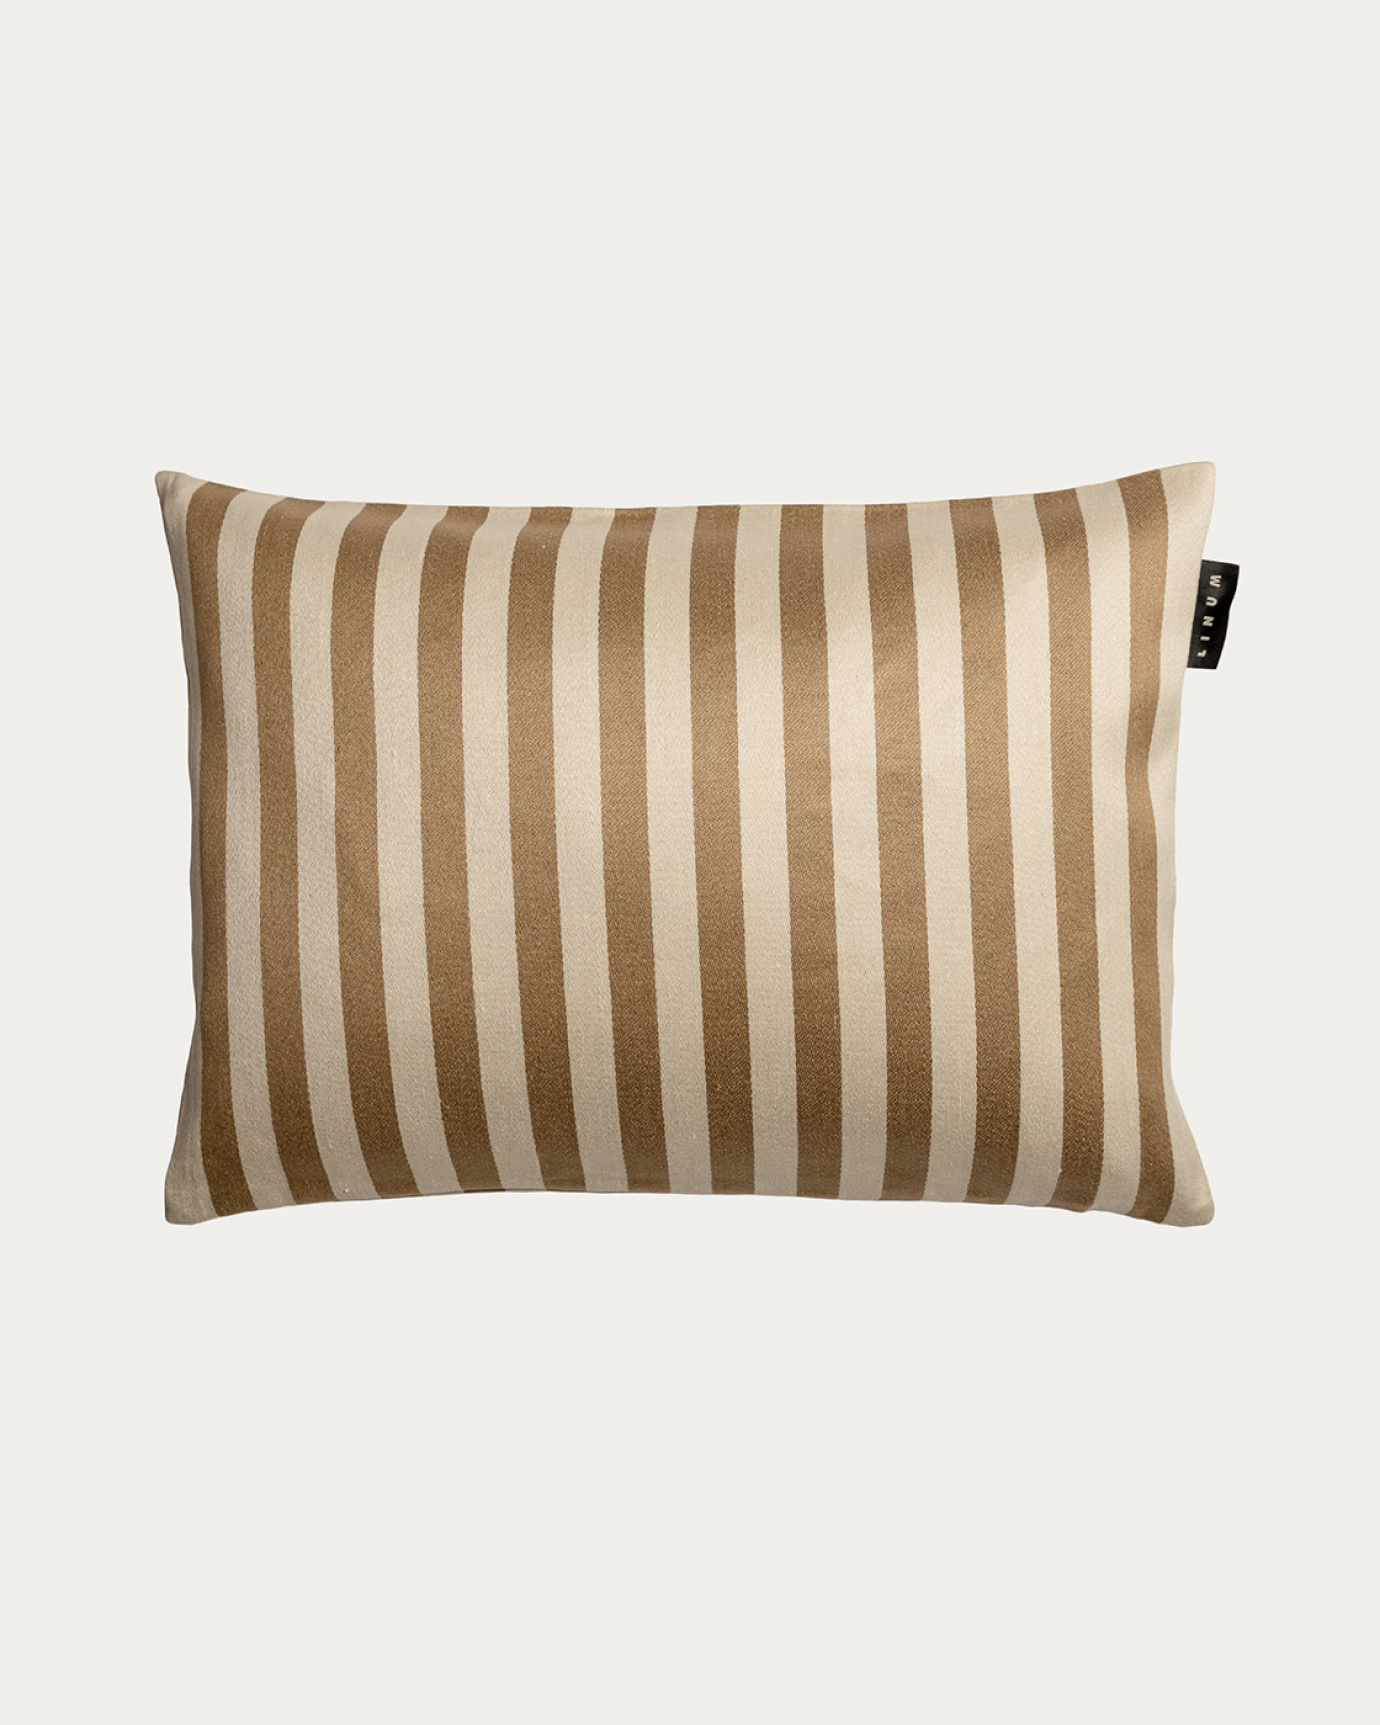 Product image camel brown AMALFI cushion cover with wide stripes made of 77% linen and 23% cotton from LINUM DESIGN. Size 35x50 cm.